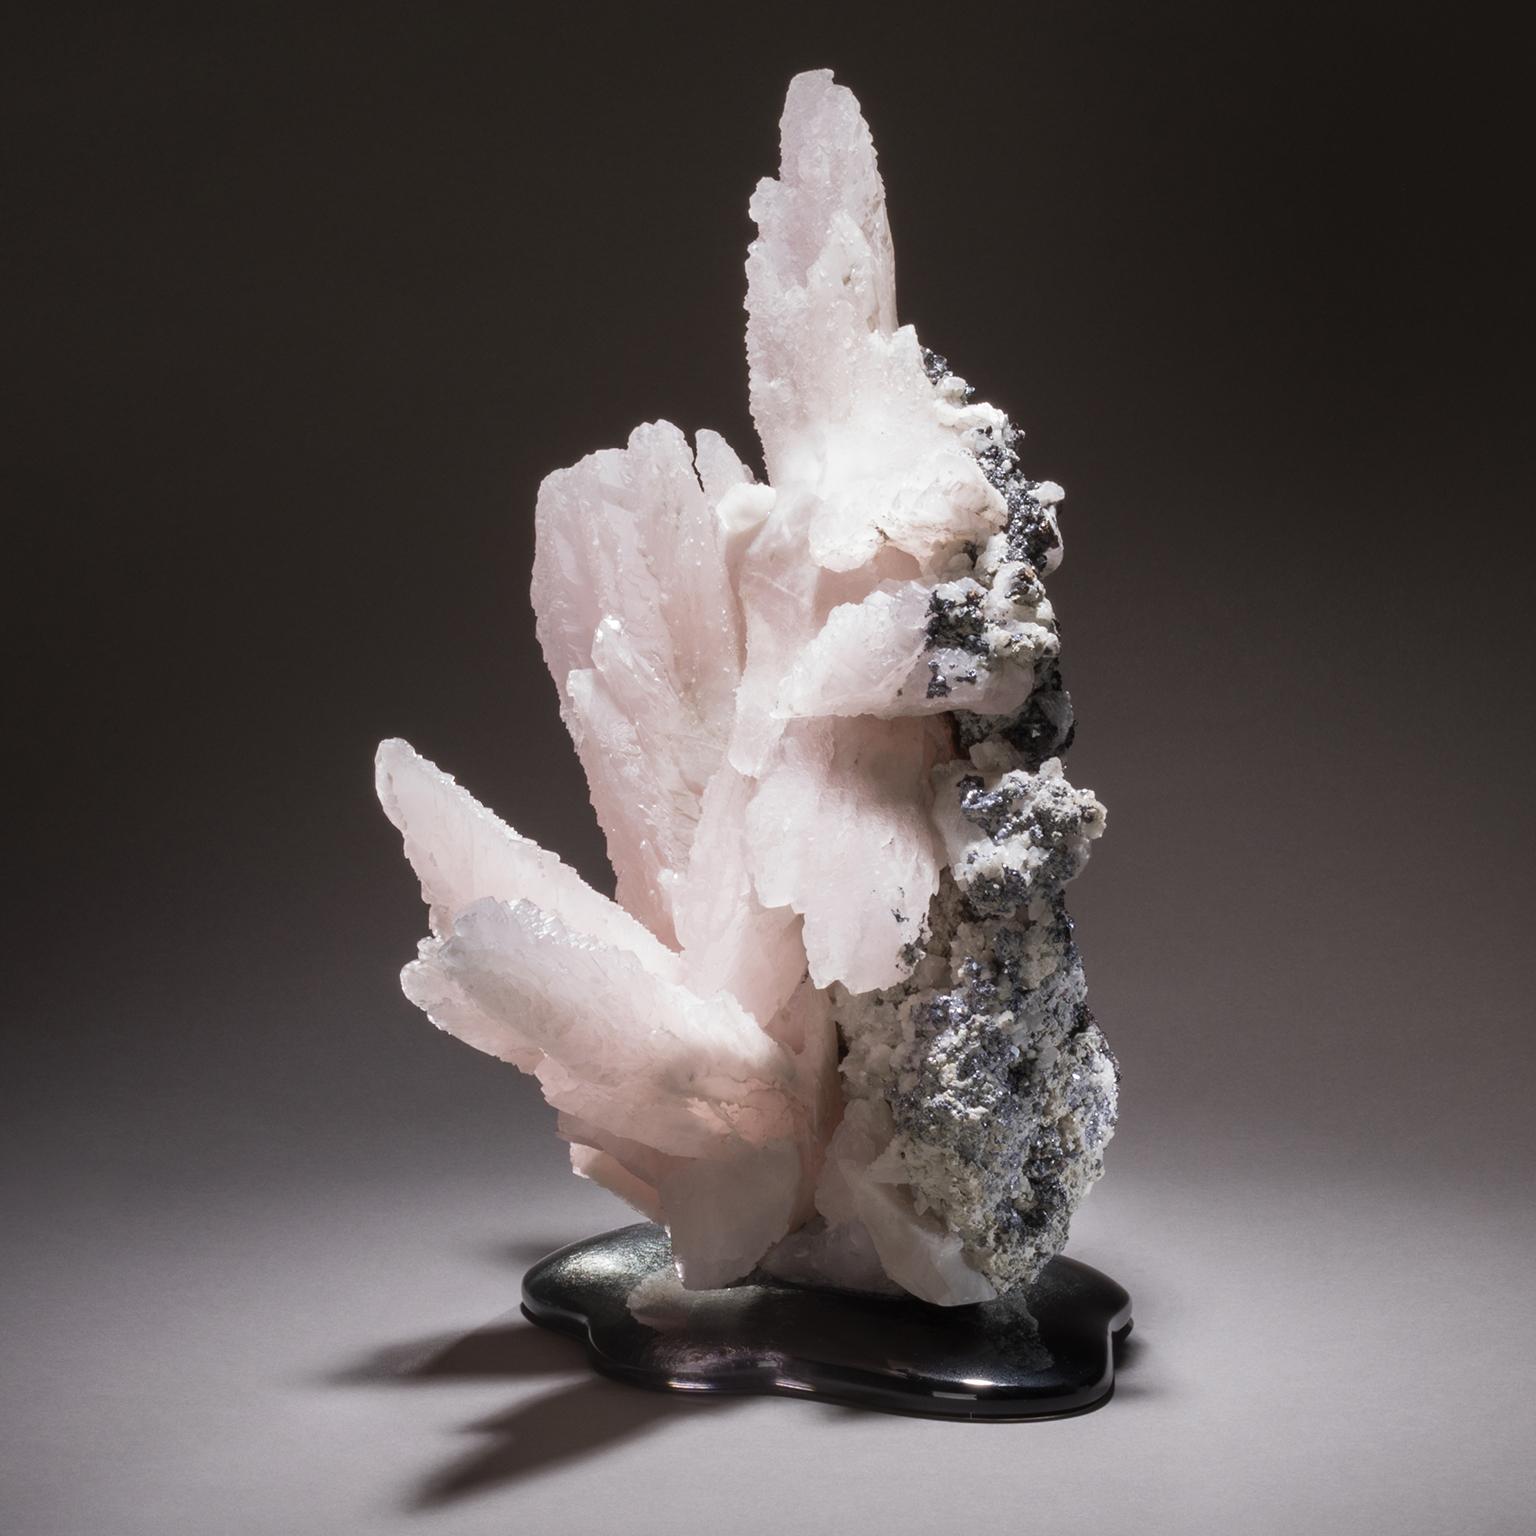 Manganoan Calcite on Cast Glass

The soothing pink hue of manganoan calcite bursts forth from a gently shaped hand cast glass base in this stunning natural sculpture from Studio Greytak. The natural points and color variations invite the viewer to